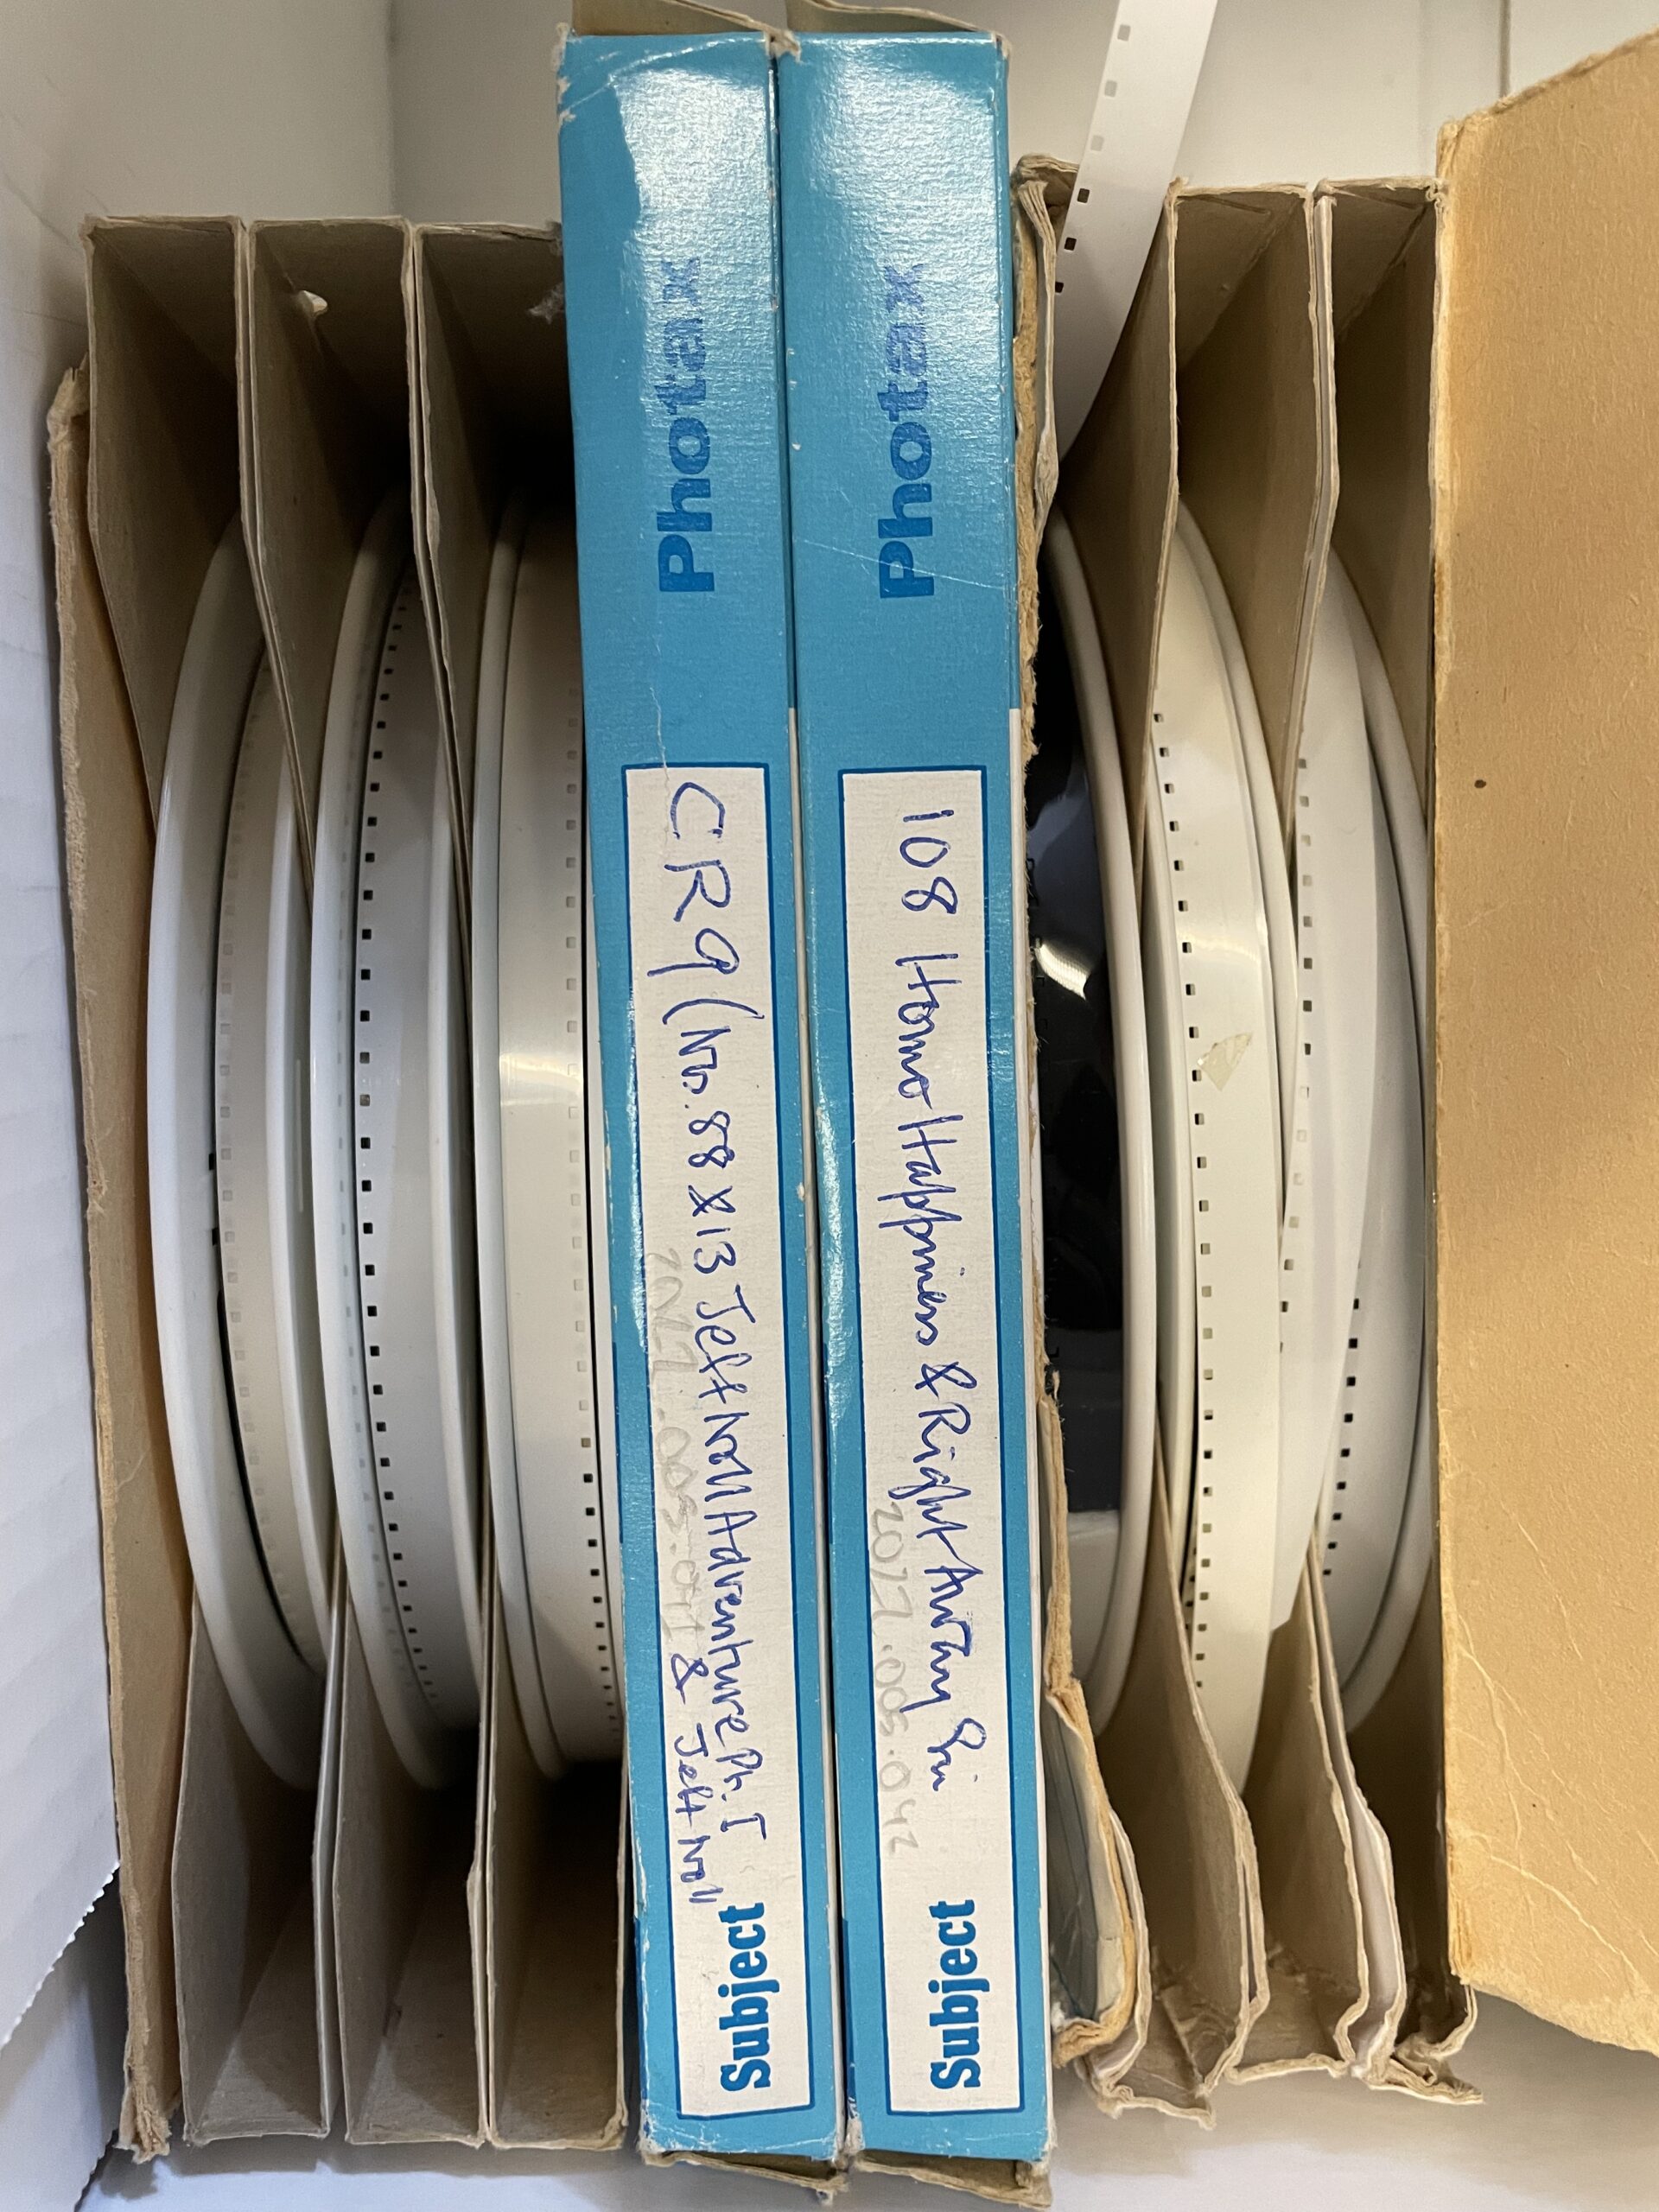 A collection of white film reels stored in blue cardboard boxes